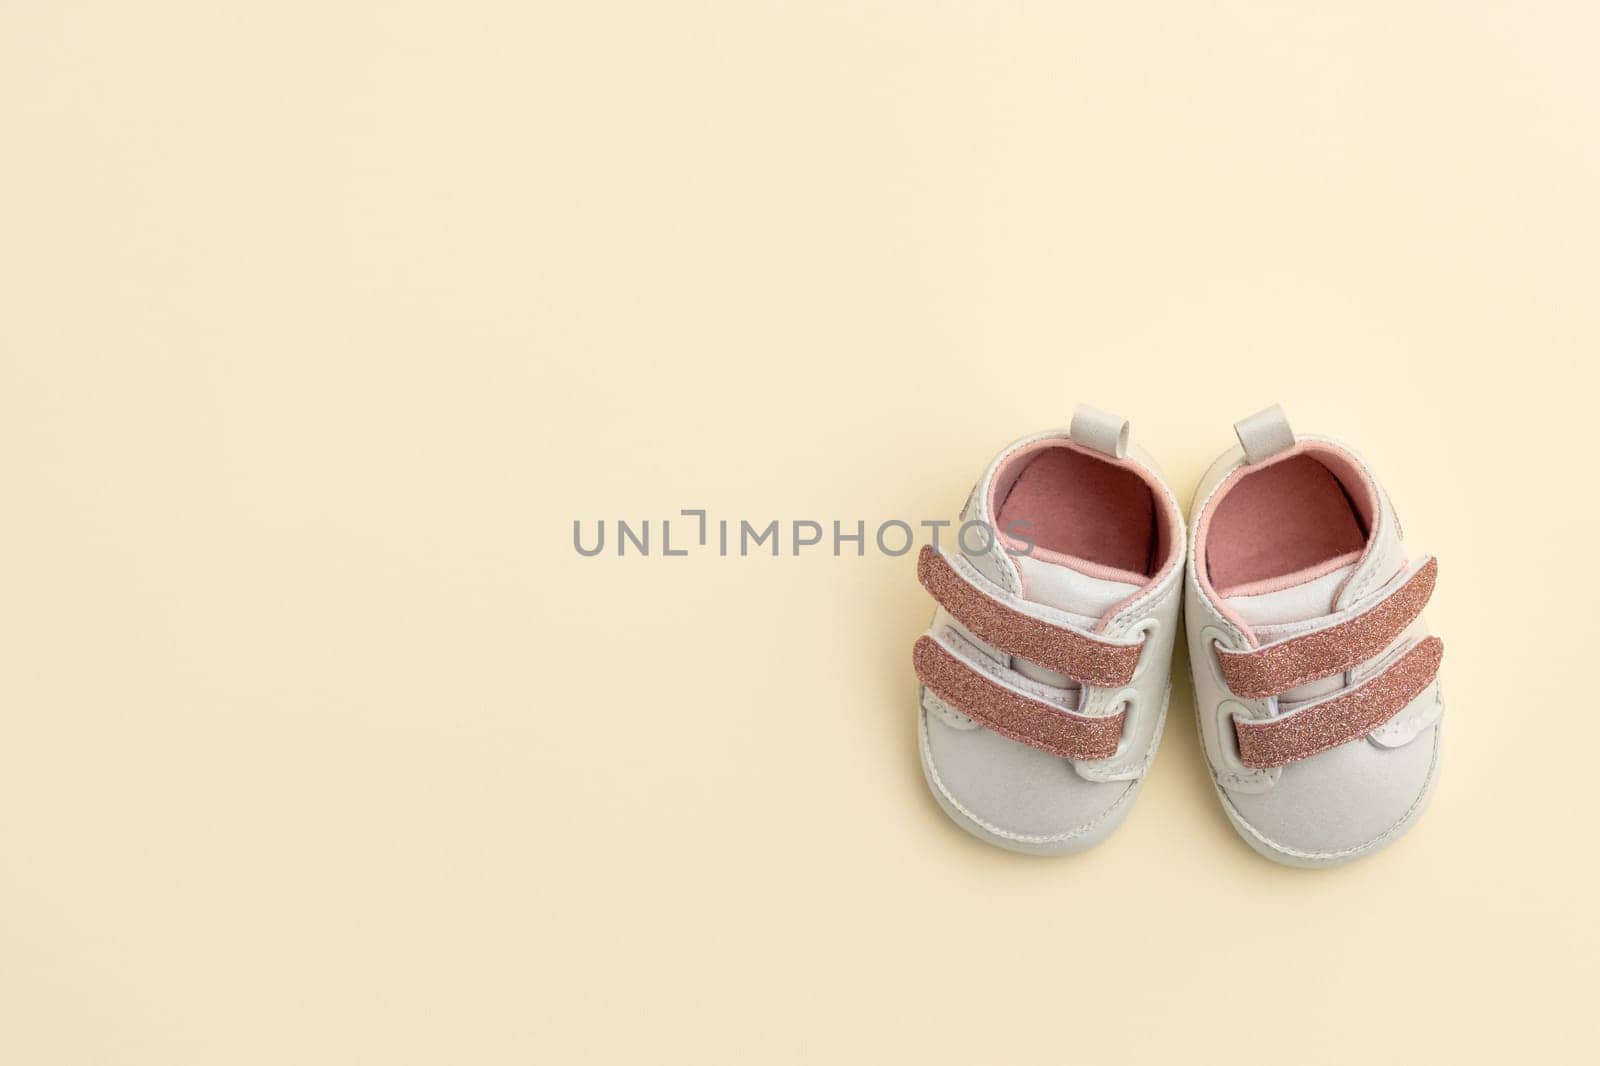 Baby shoes on paper background with copy space. Baby clothes concept. Top view, flat lay by sdf_qwe